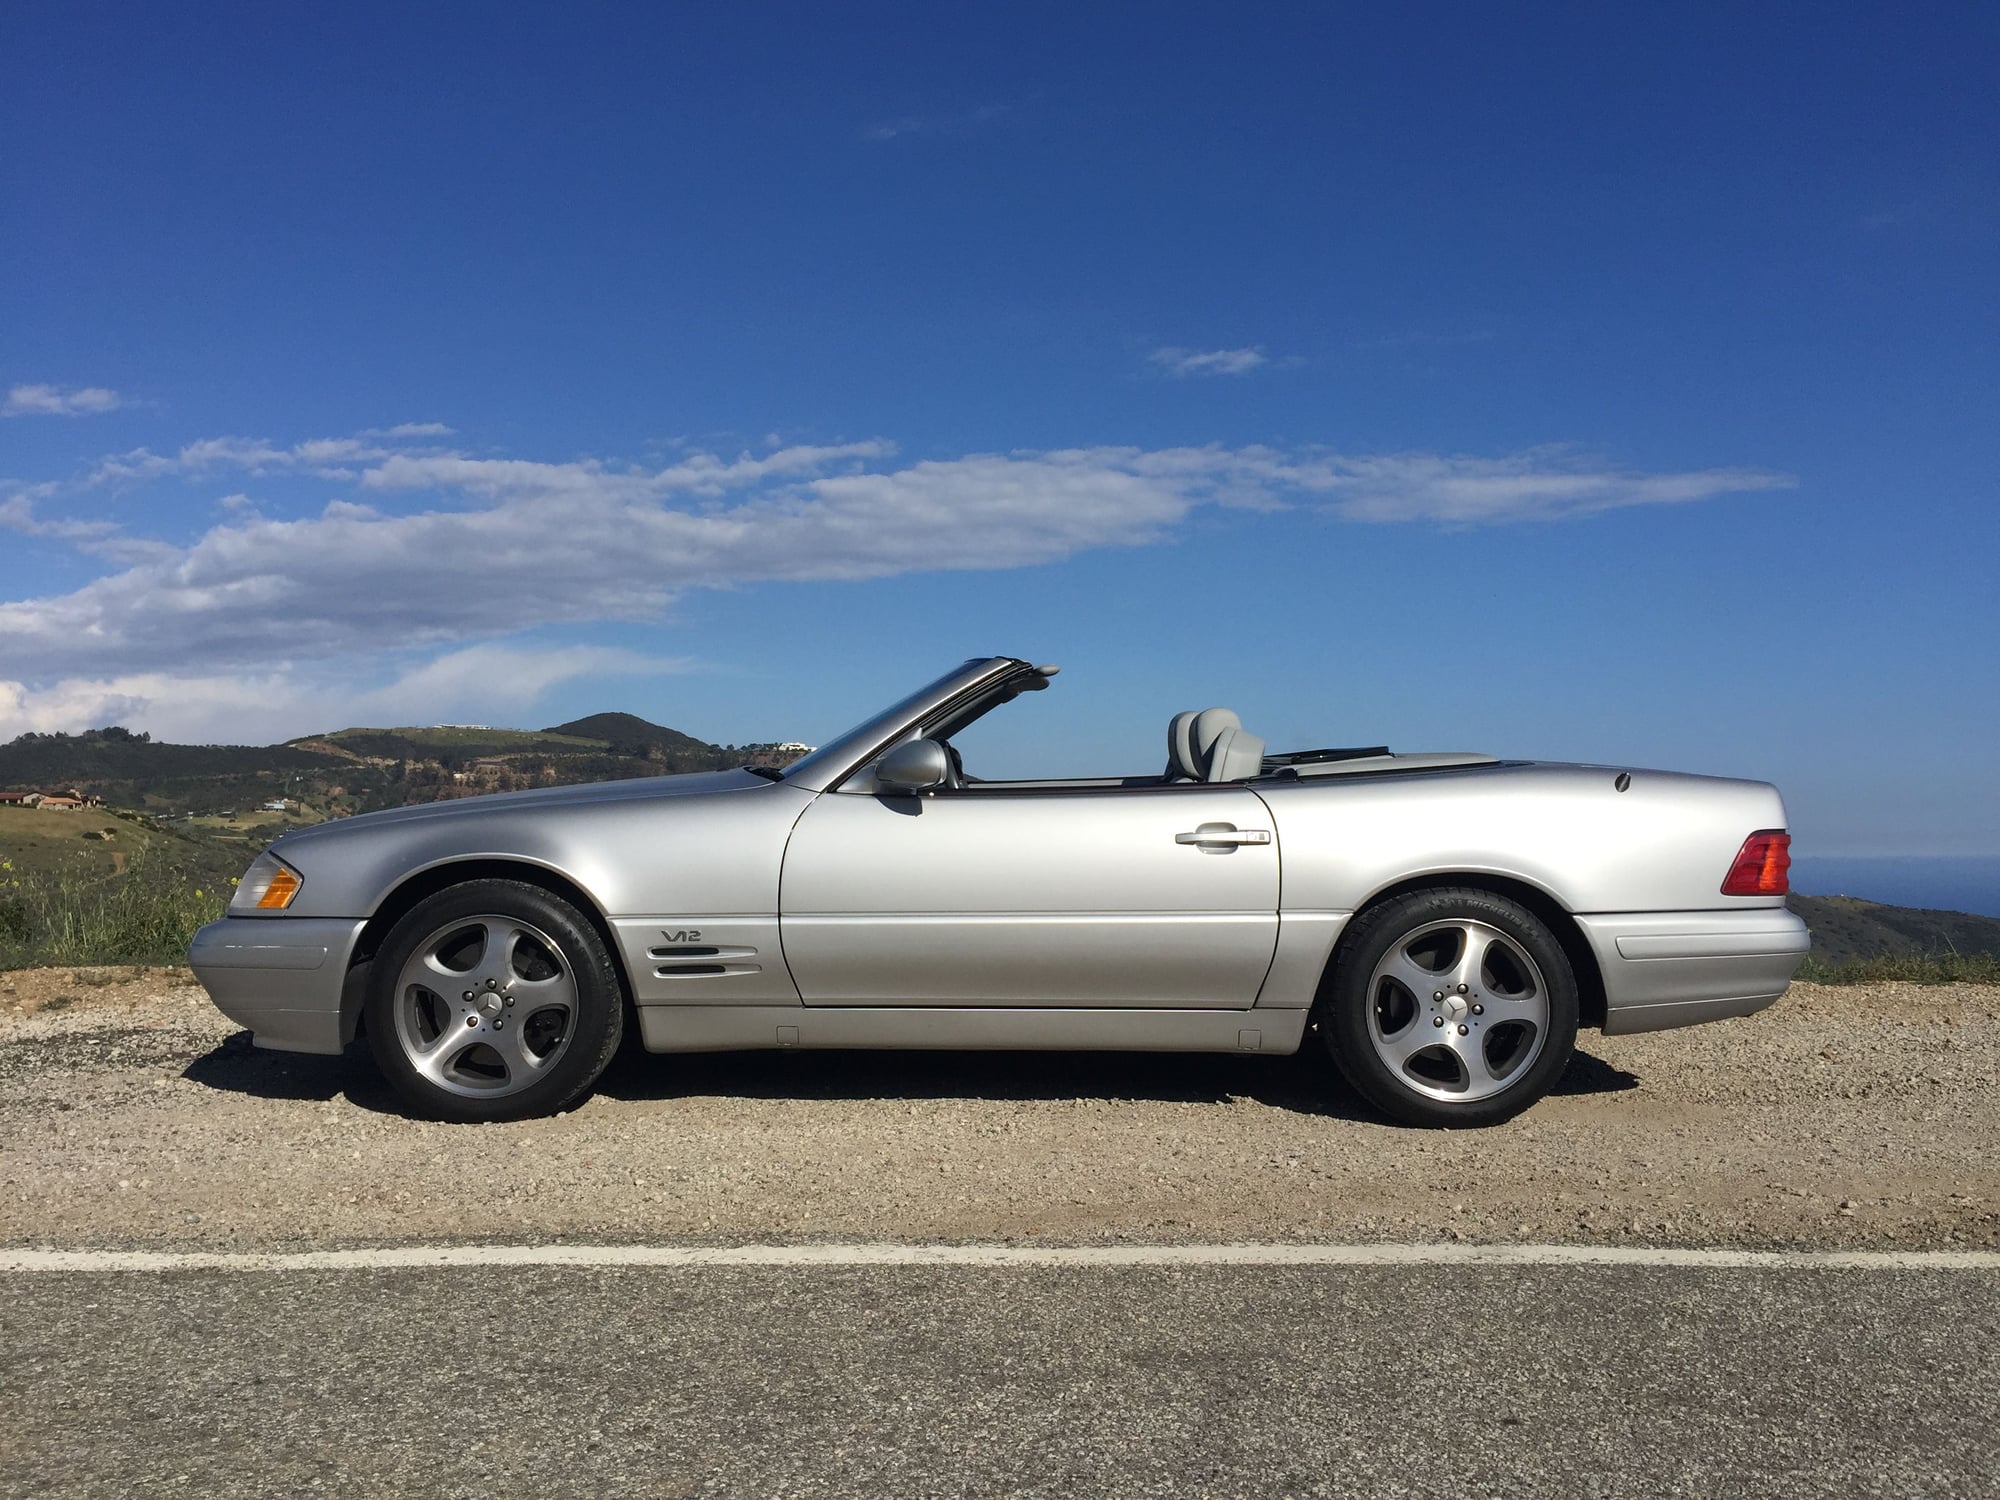 1999 Mercedes-Benz SL600 - 1999 SL600, 69k Miles, Impeccably Maintained, All Original - Used - VIN WDBFA76FXXF182999 - 68,950 Miles - 12 cyl - 2WD - Automatic - Convertible - Silver - Los Angeles, CA 90035, United States